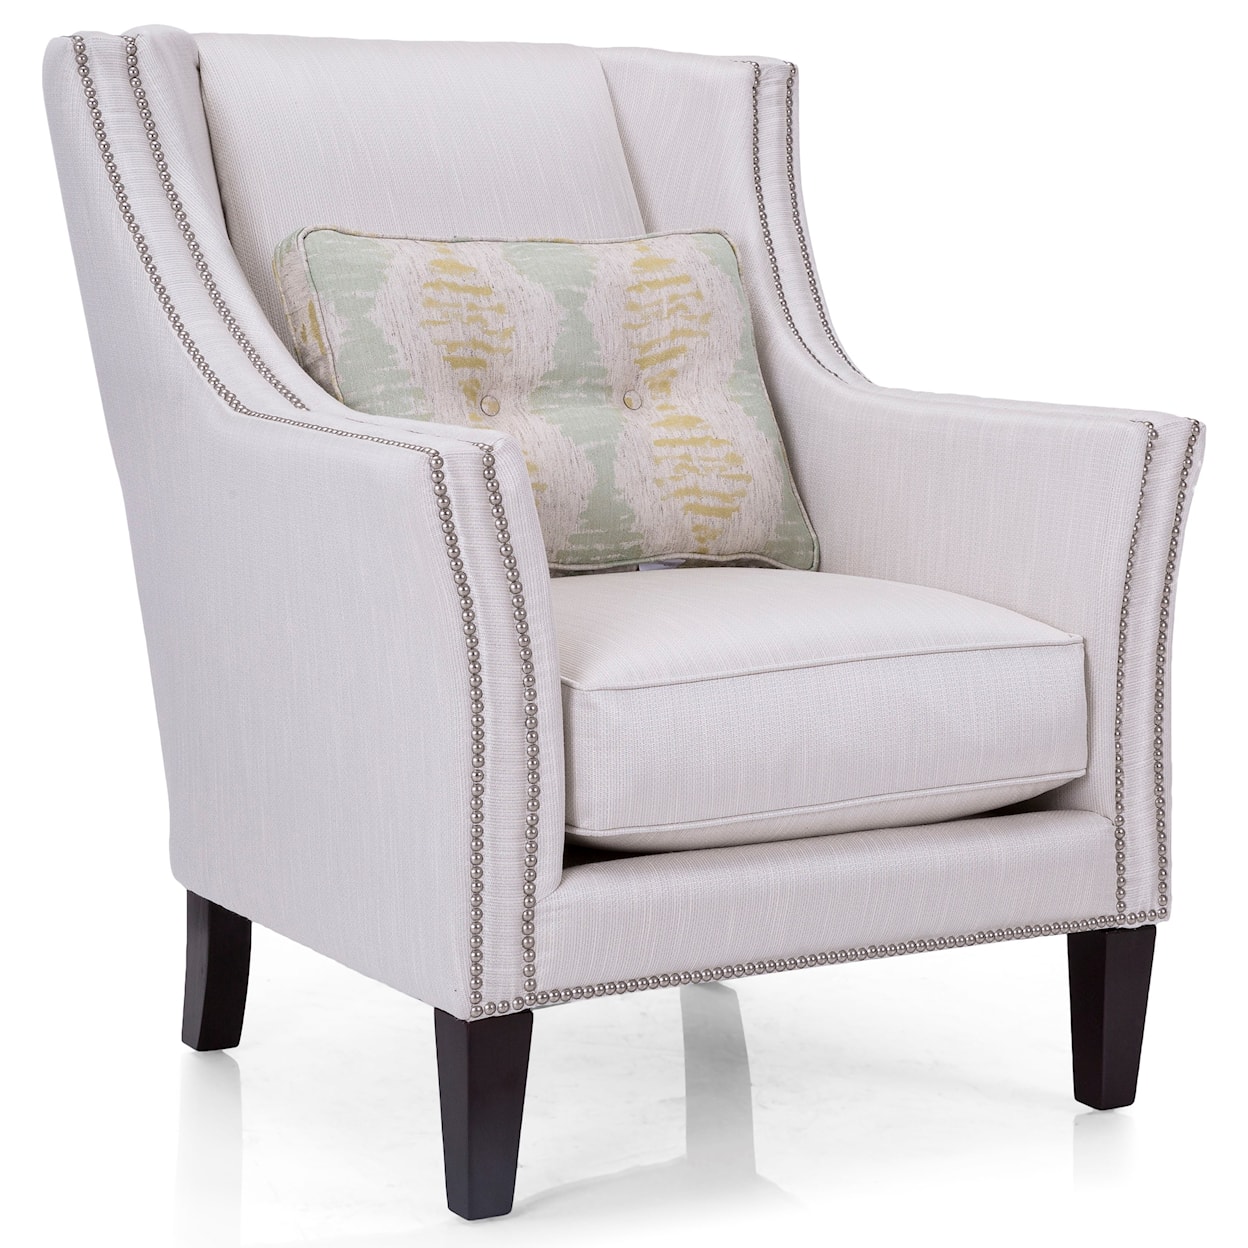 Decor-Rest Upholstered Accents Track Arm Chair